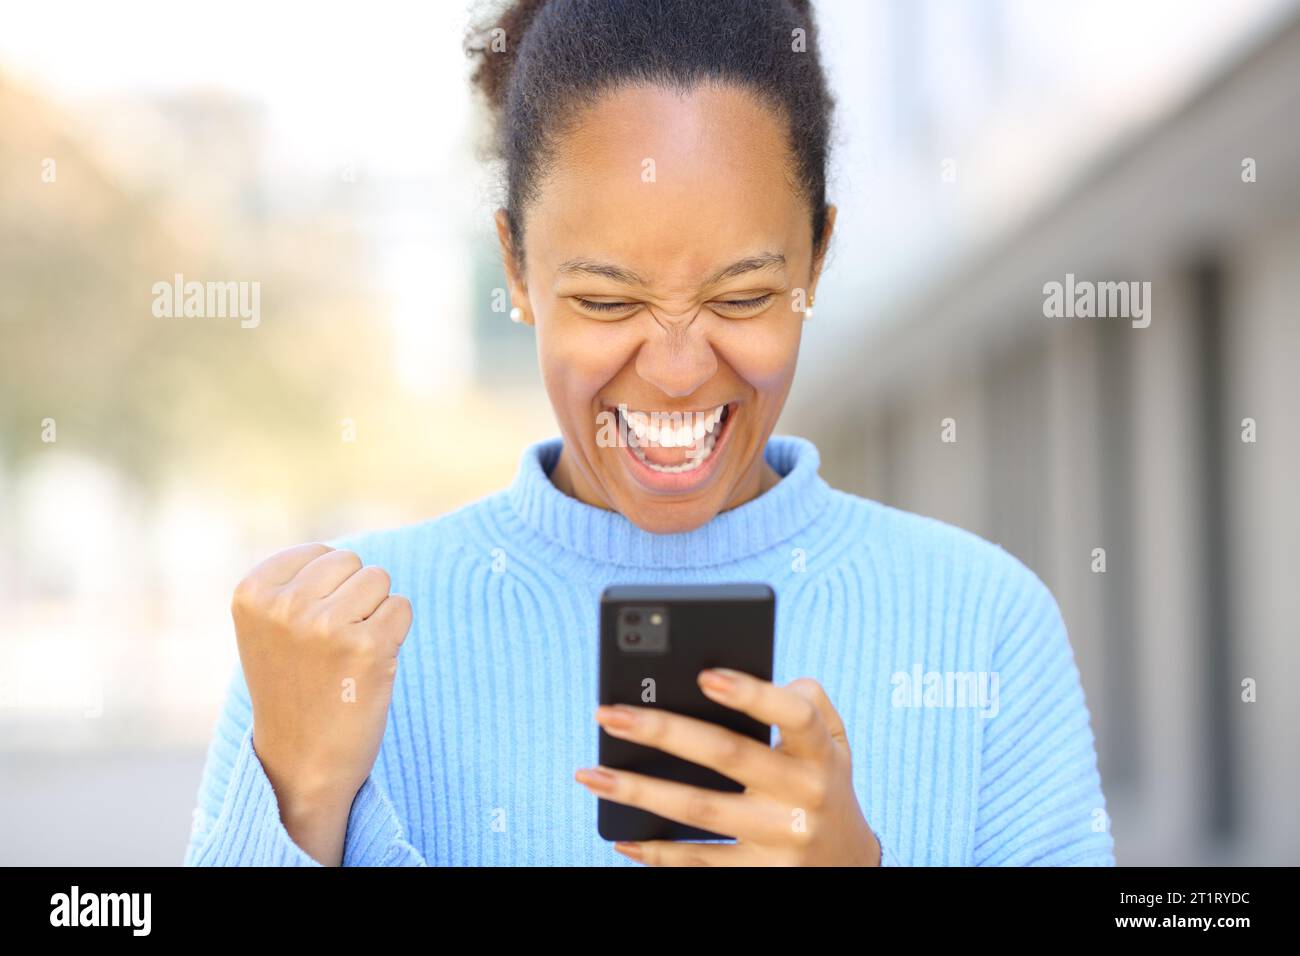 Front view portrait of an excited black woman checking good news on phone in the street Stock Photo